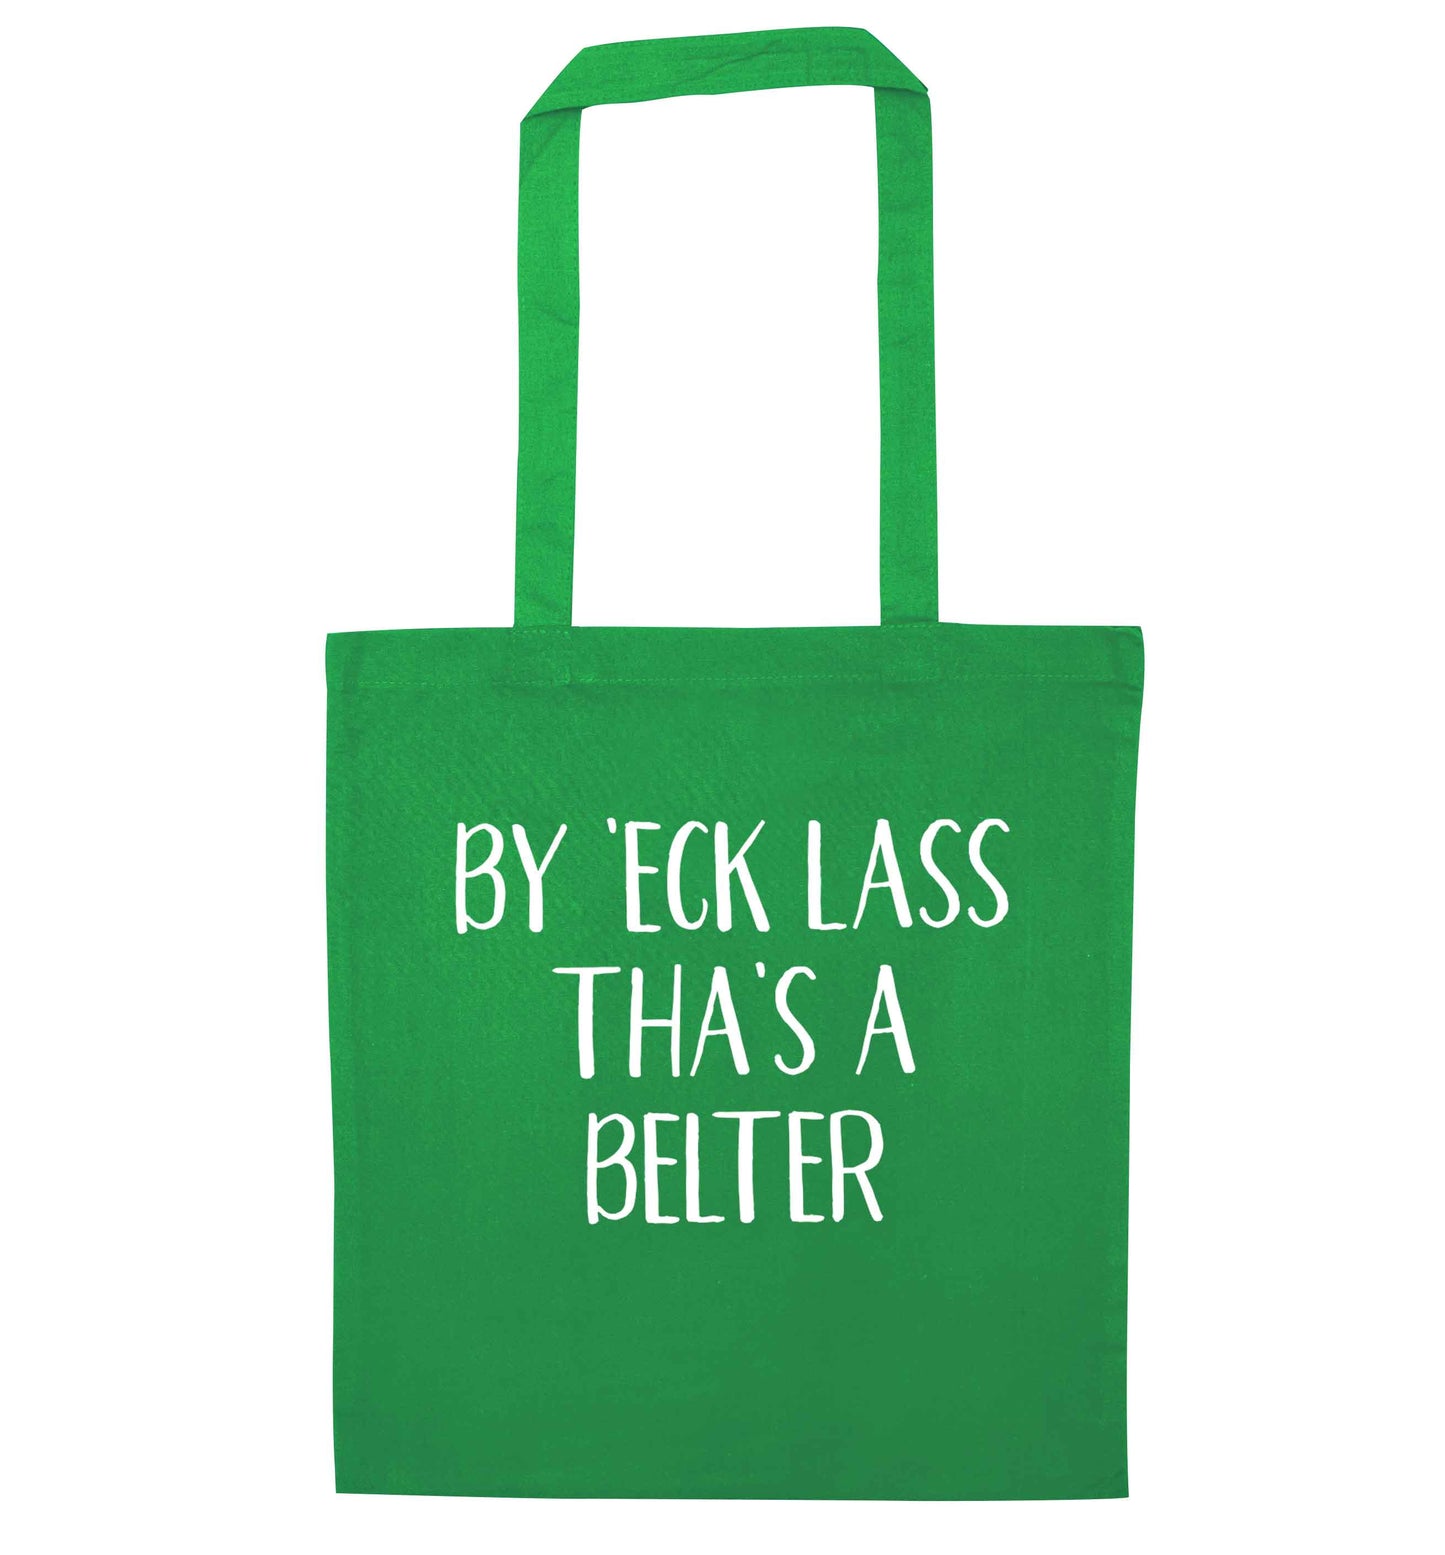 Be 'eck lass tha's a belter green tote bag